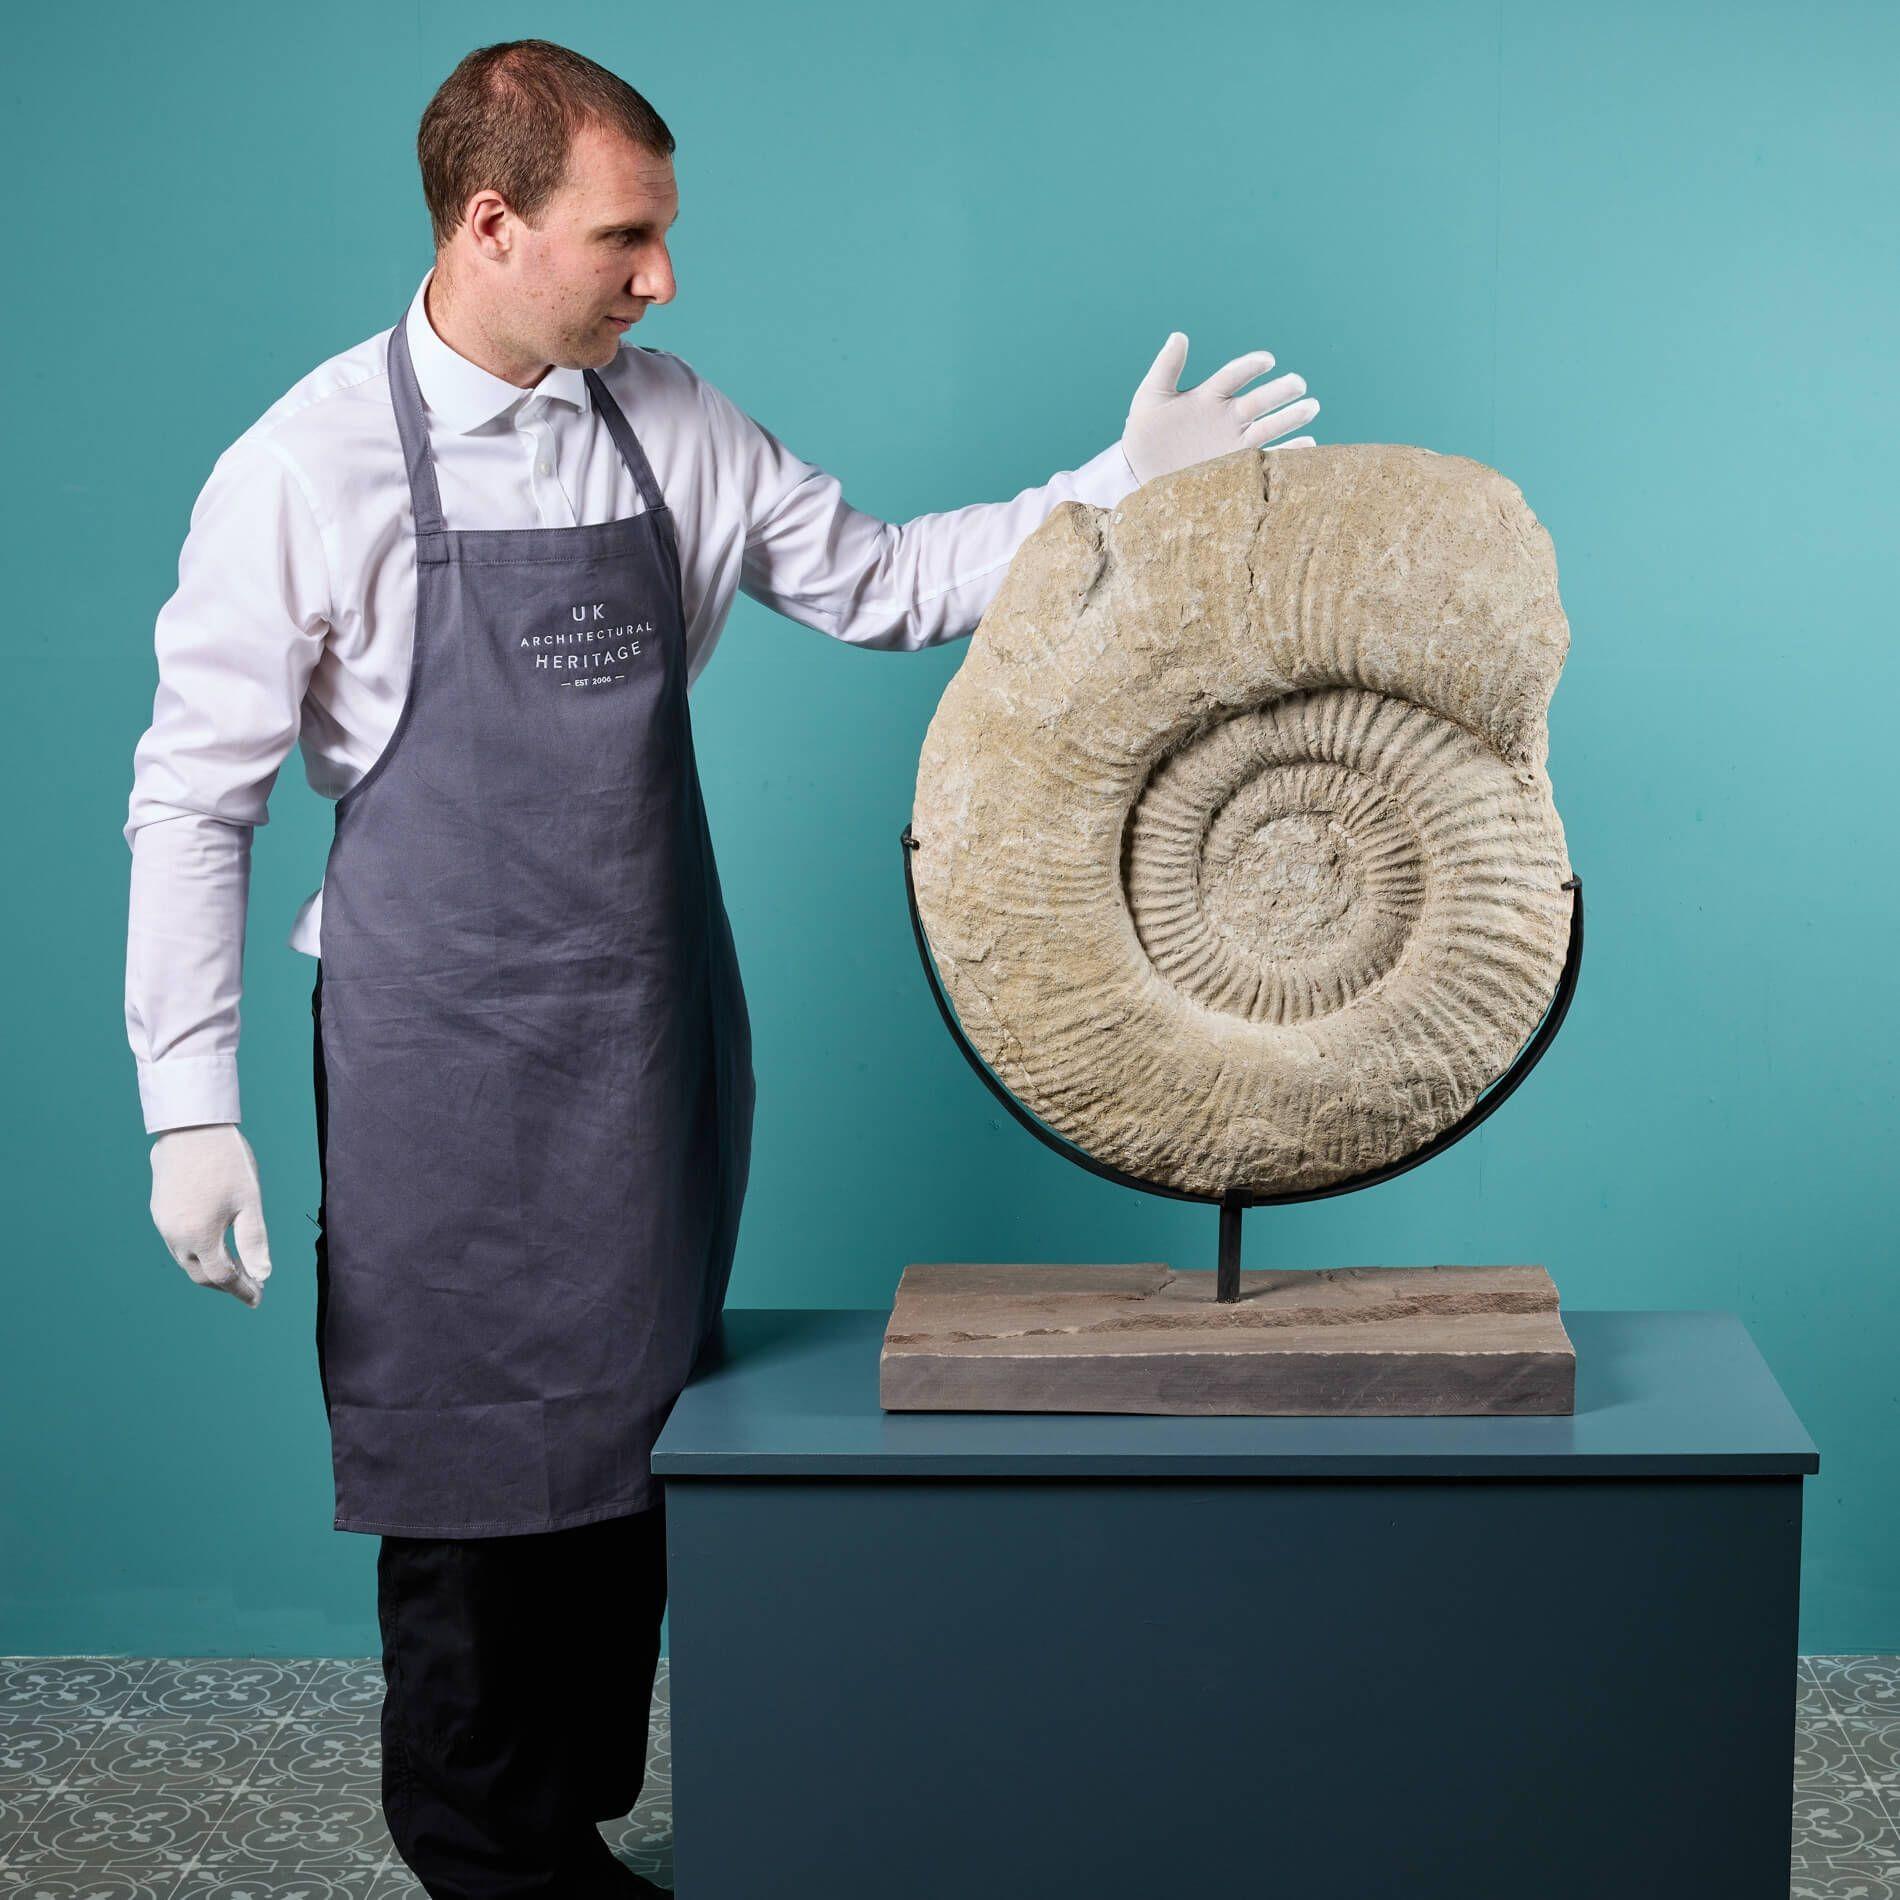 A superb giant ammonite fossil of the Titanites Giganteus variety mounted on a bespoke steel stand with sandstone base. Ex. private collection of Gordon Walkden.

Sourced from Worth Quarry, Swanage on Britain’s Jurassic Coast, this impressive